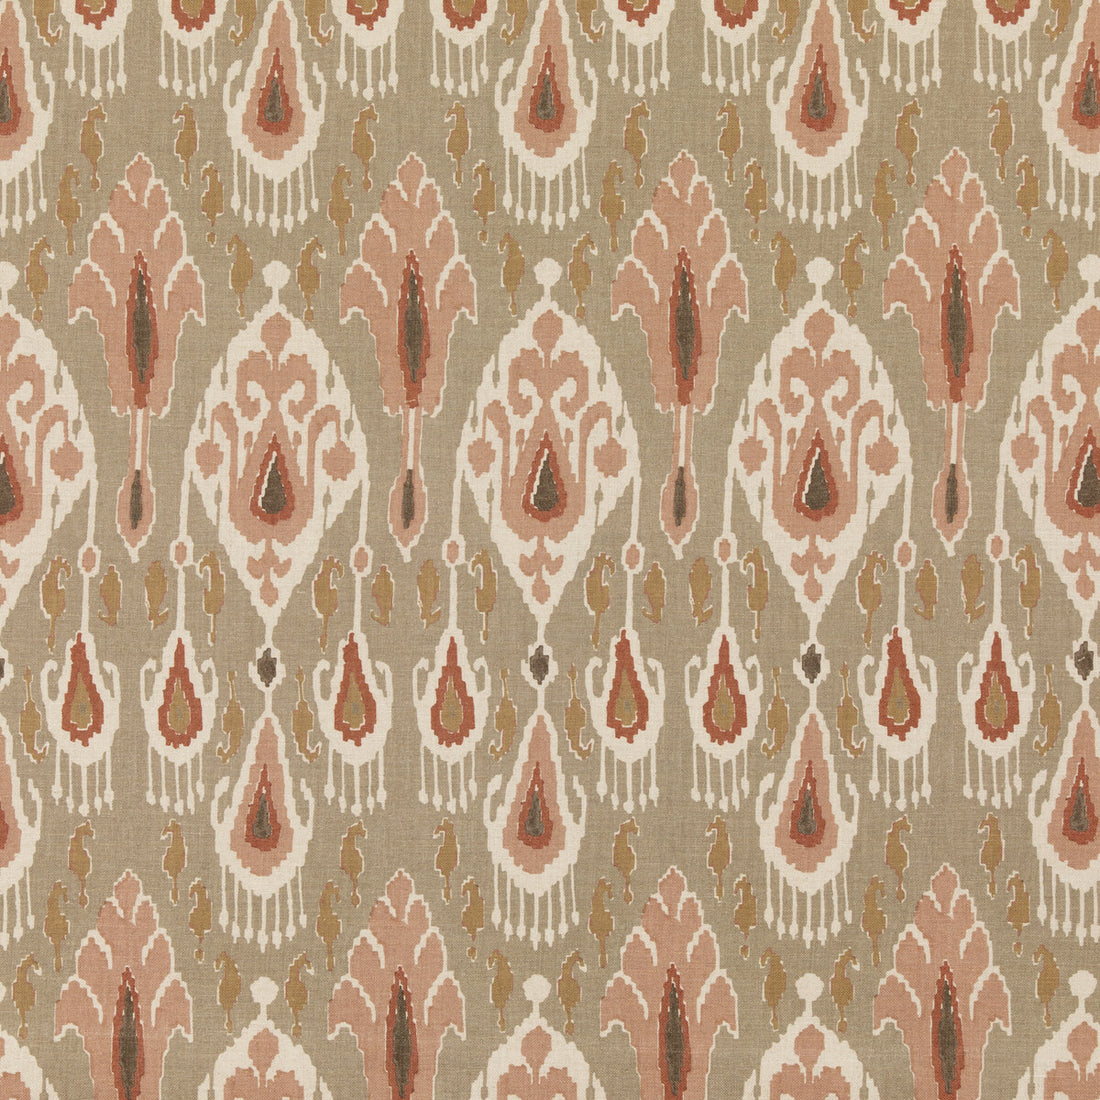 Ikat Bokhara fabric in neutral color - pattern BP10853.5.0 - by G P &amp; J Baker in the Chifu collection